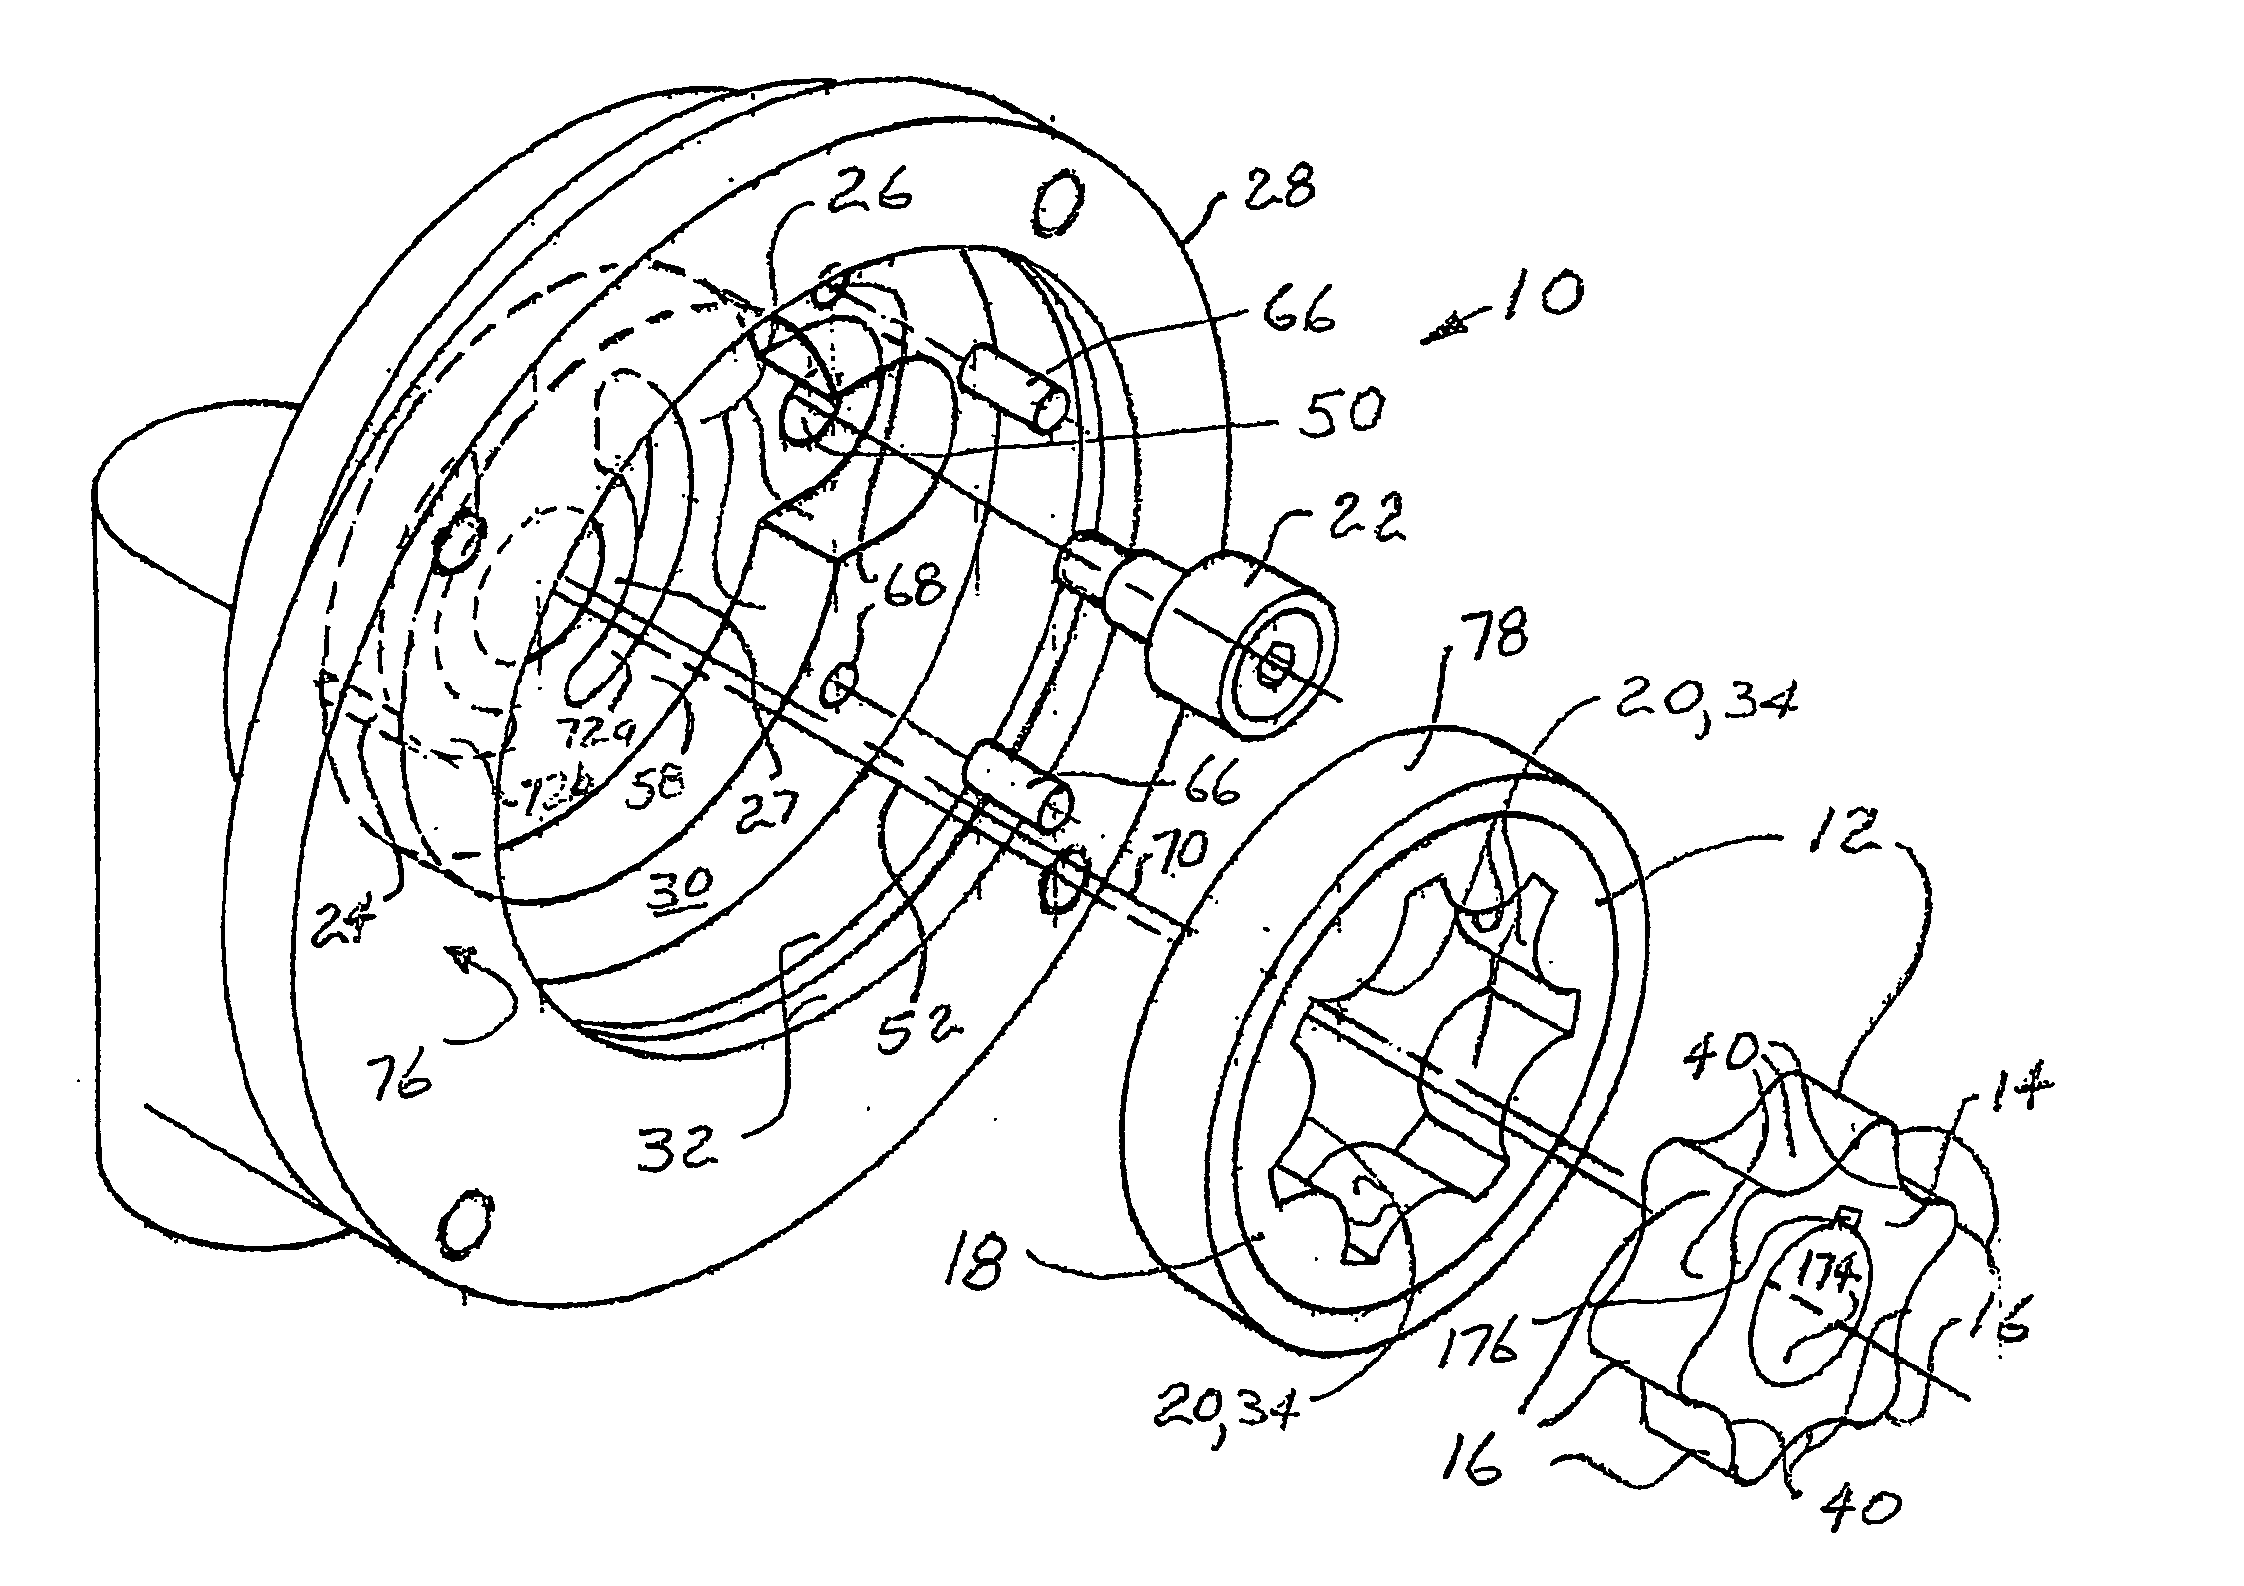 Gerotor pumps and methods of manufacture therefor